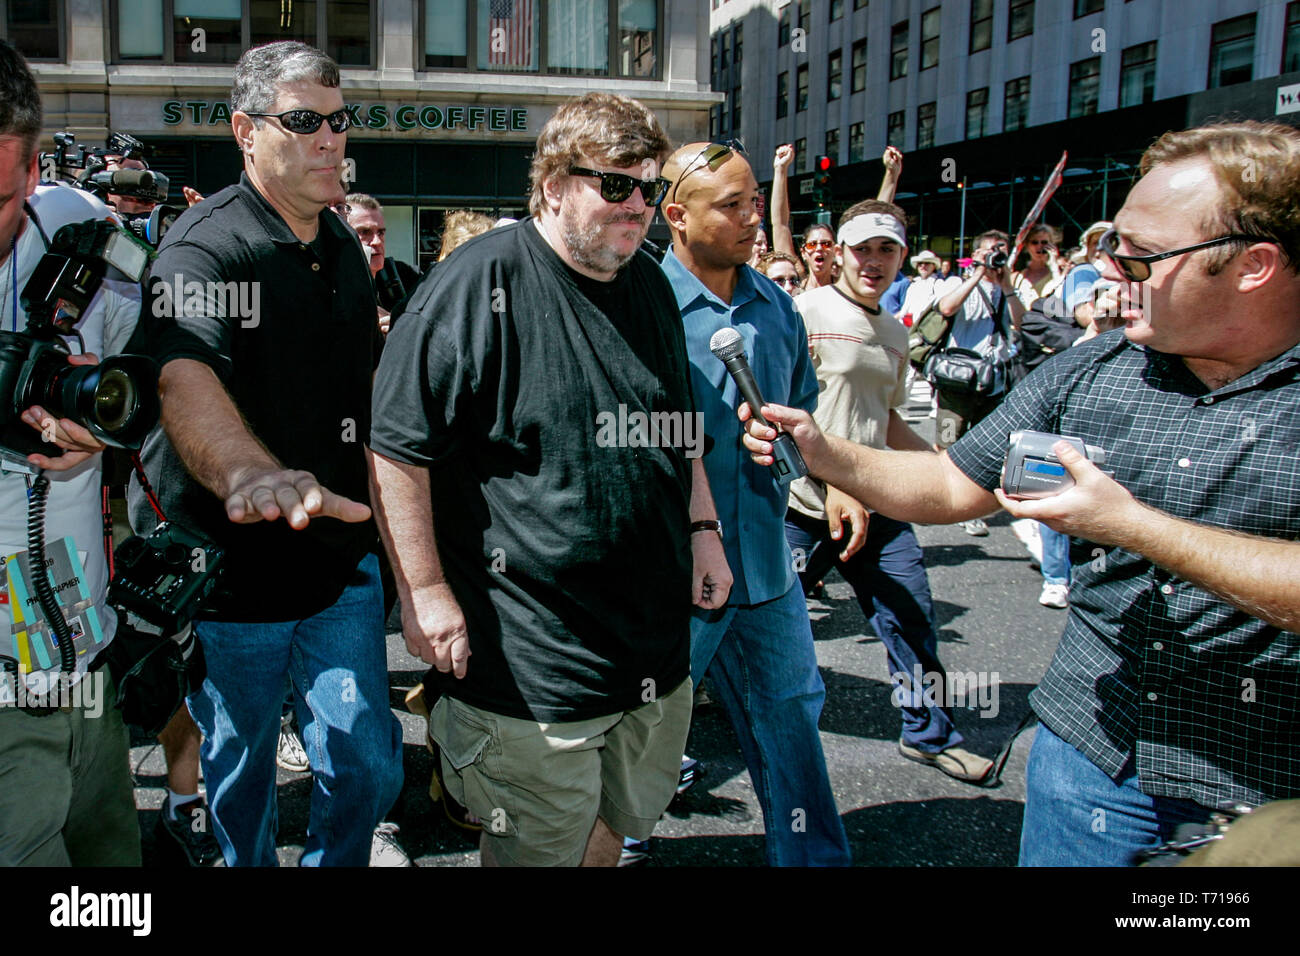 Documentary film maker and author Michael Moore is escorted by bodyguards while attending a protest march during the Republican National Convention in New York. To the left of Moore, shock jock and conspiracy theorist Alex Jones is trying to interview Moore. Stock Photo